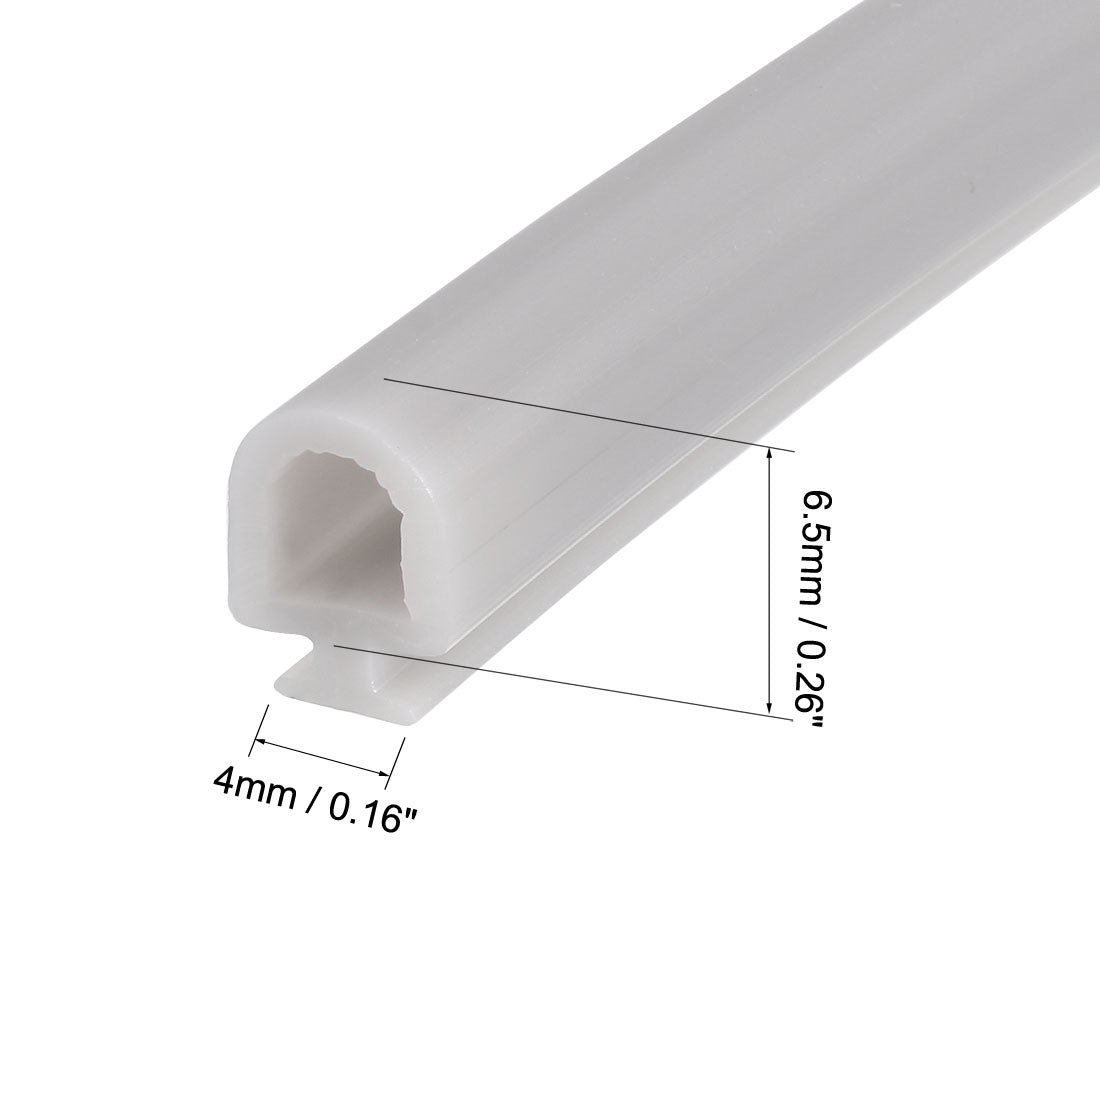 uxcell Uxcell T-Slot Mount Weatherstrip Seal 6.5mm Bulb Bubble for 4mm Slot 5 Meters Gray